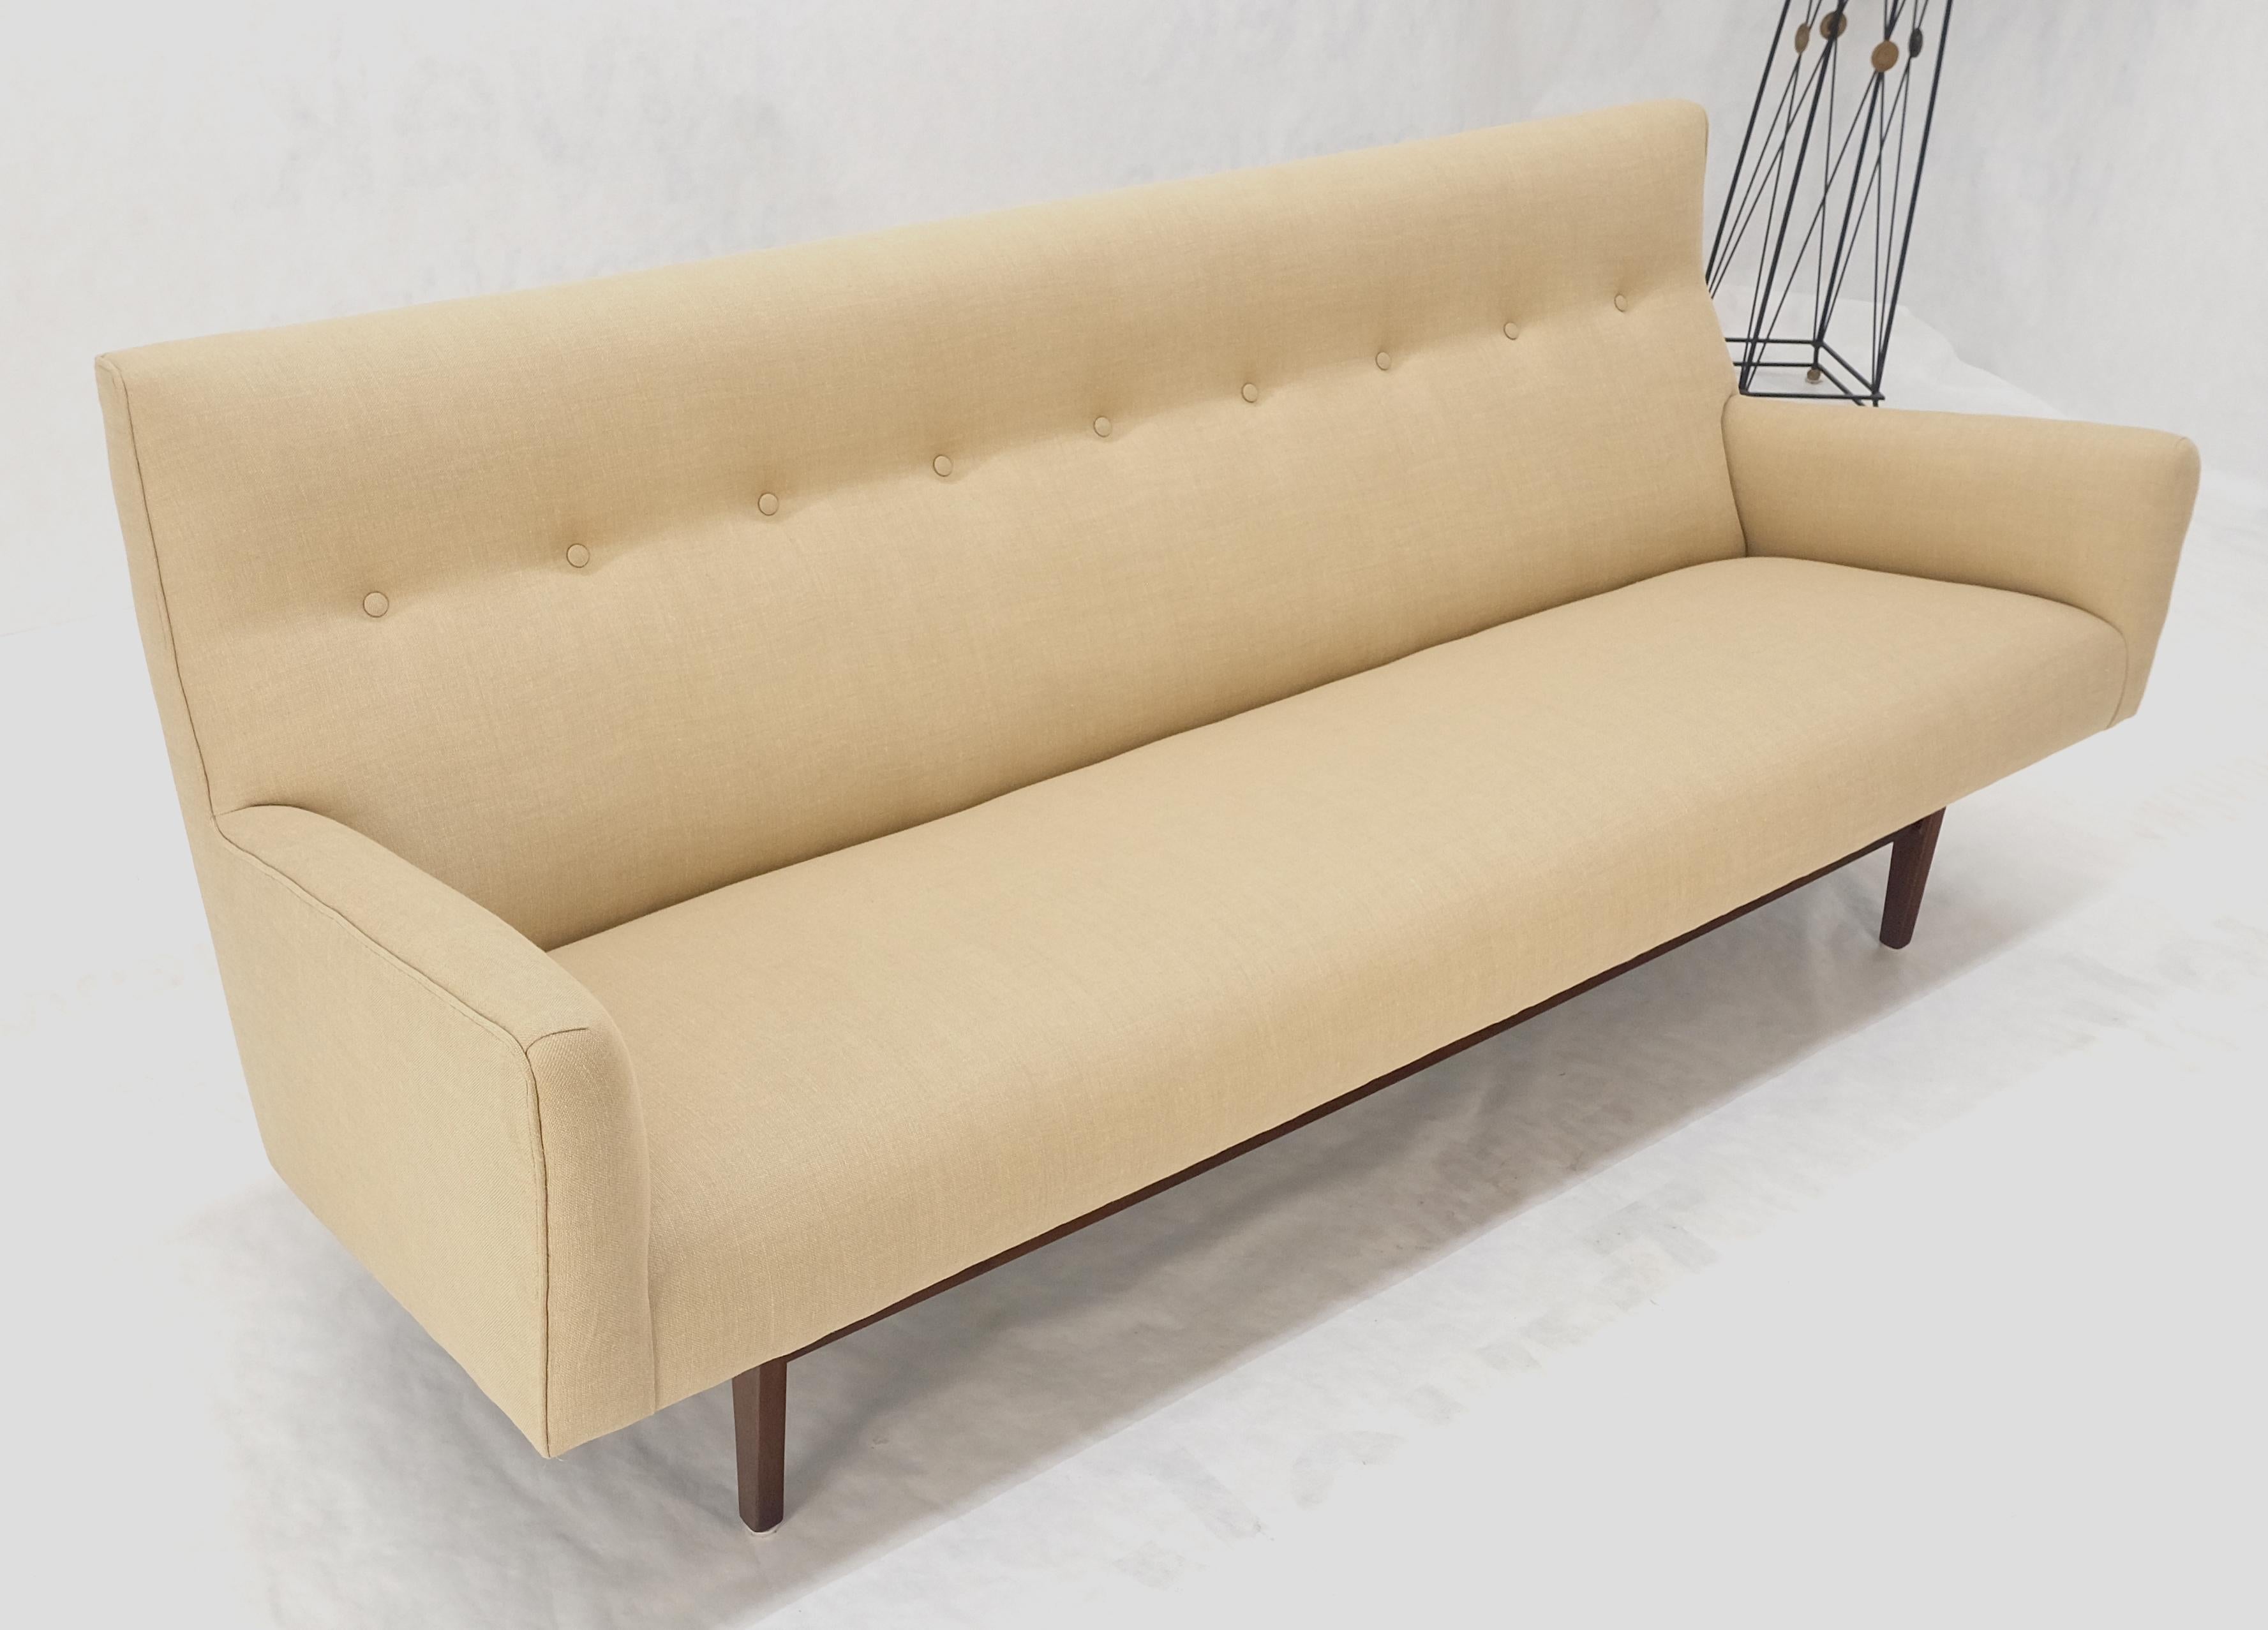 Jens Risom NEW Beige Linen Upholstery Oiled Walnut Frame c1960s Sofa Couch MINT! For Sale 8